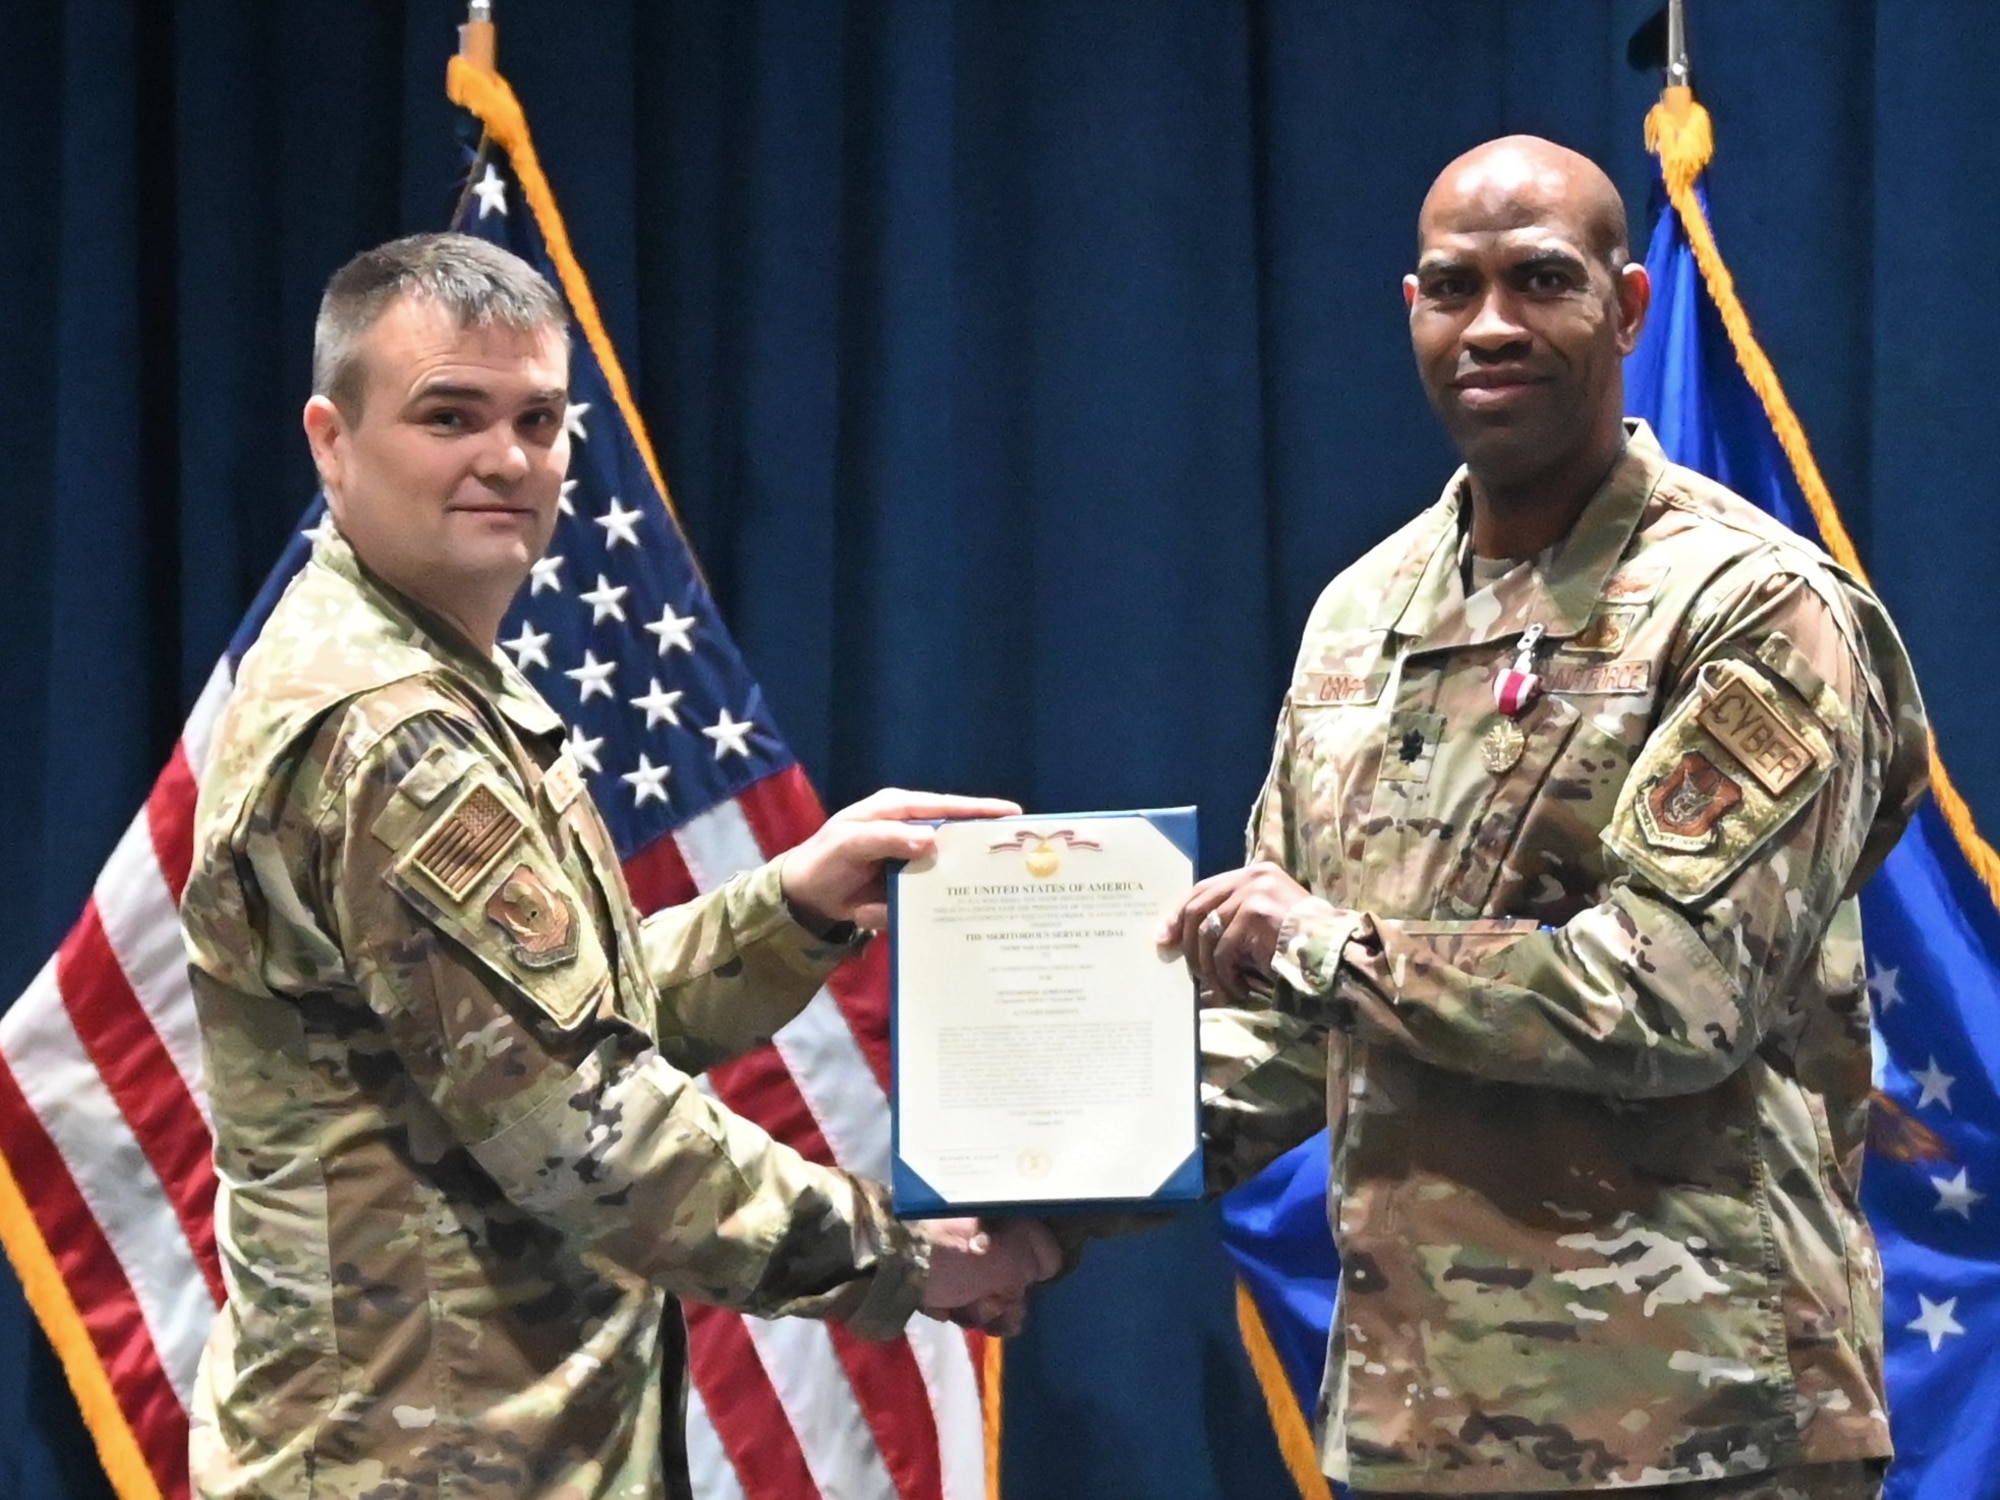 Col. Richard Wallace, 960th Cyber Operations Group commander, presents the Meritorious Service Medal to Lt. Col. Jarvis Croff, outgoing commander of the 960th Operations Support Flight.